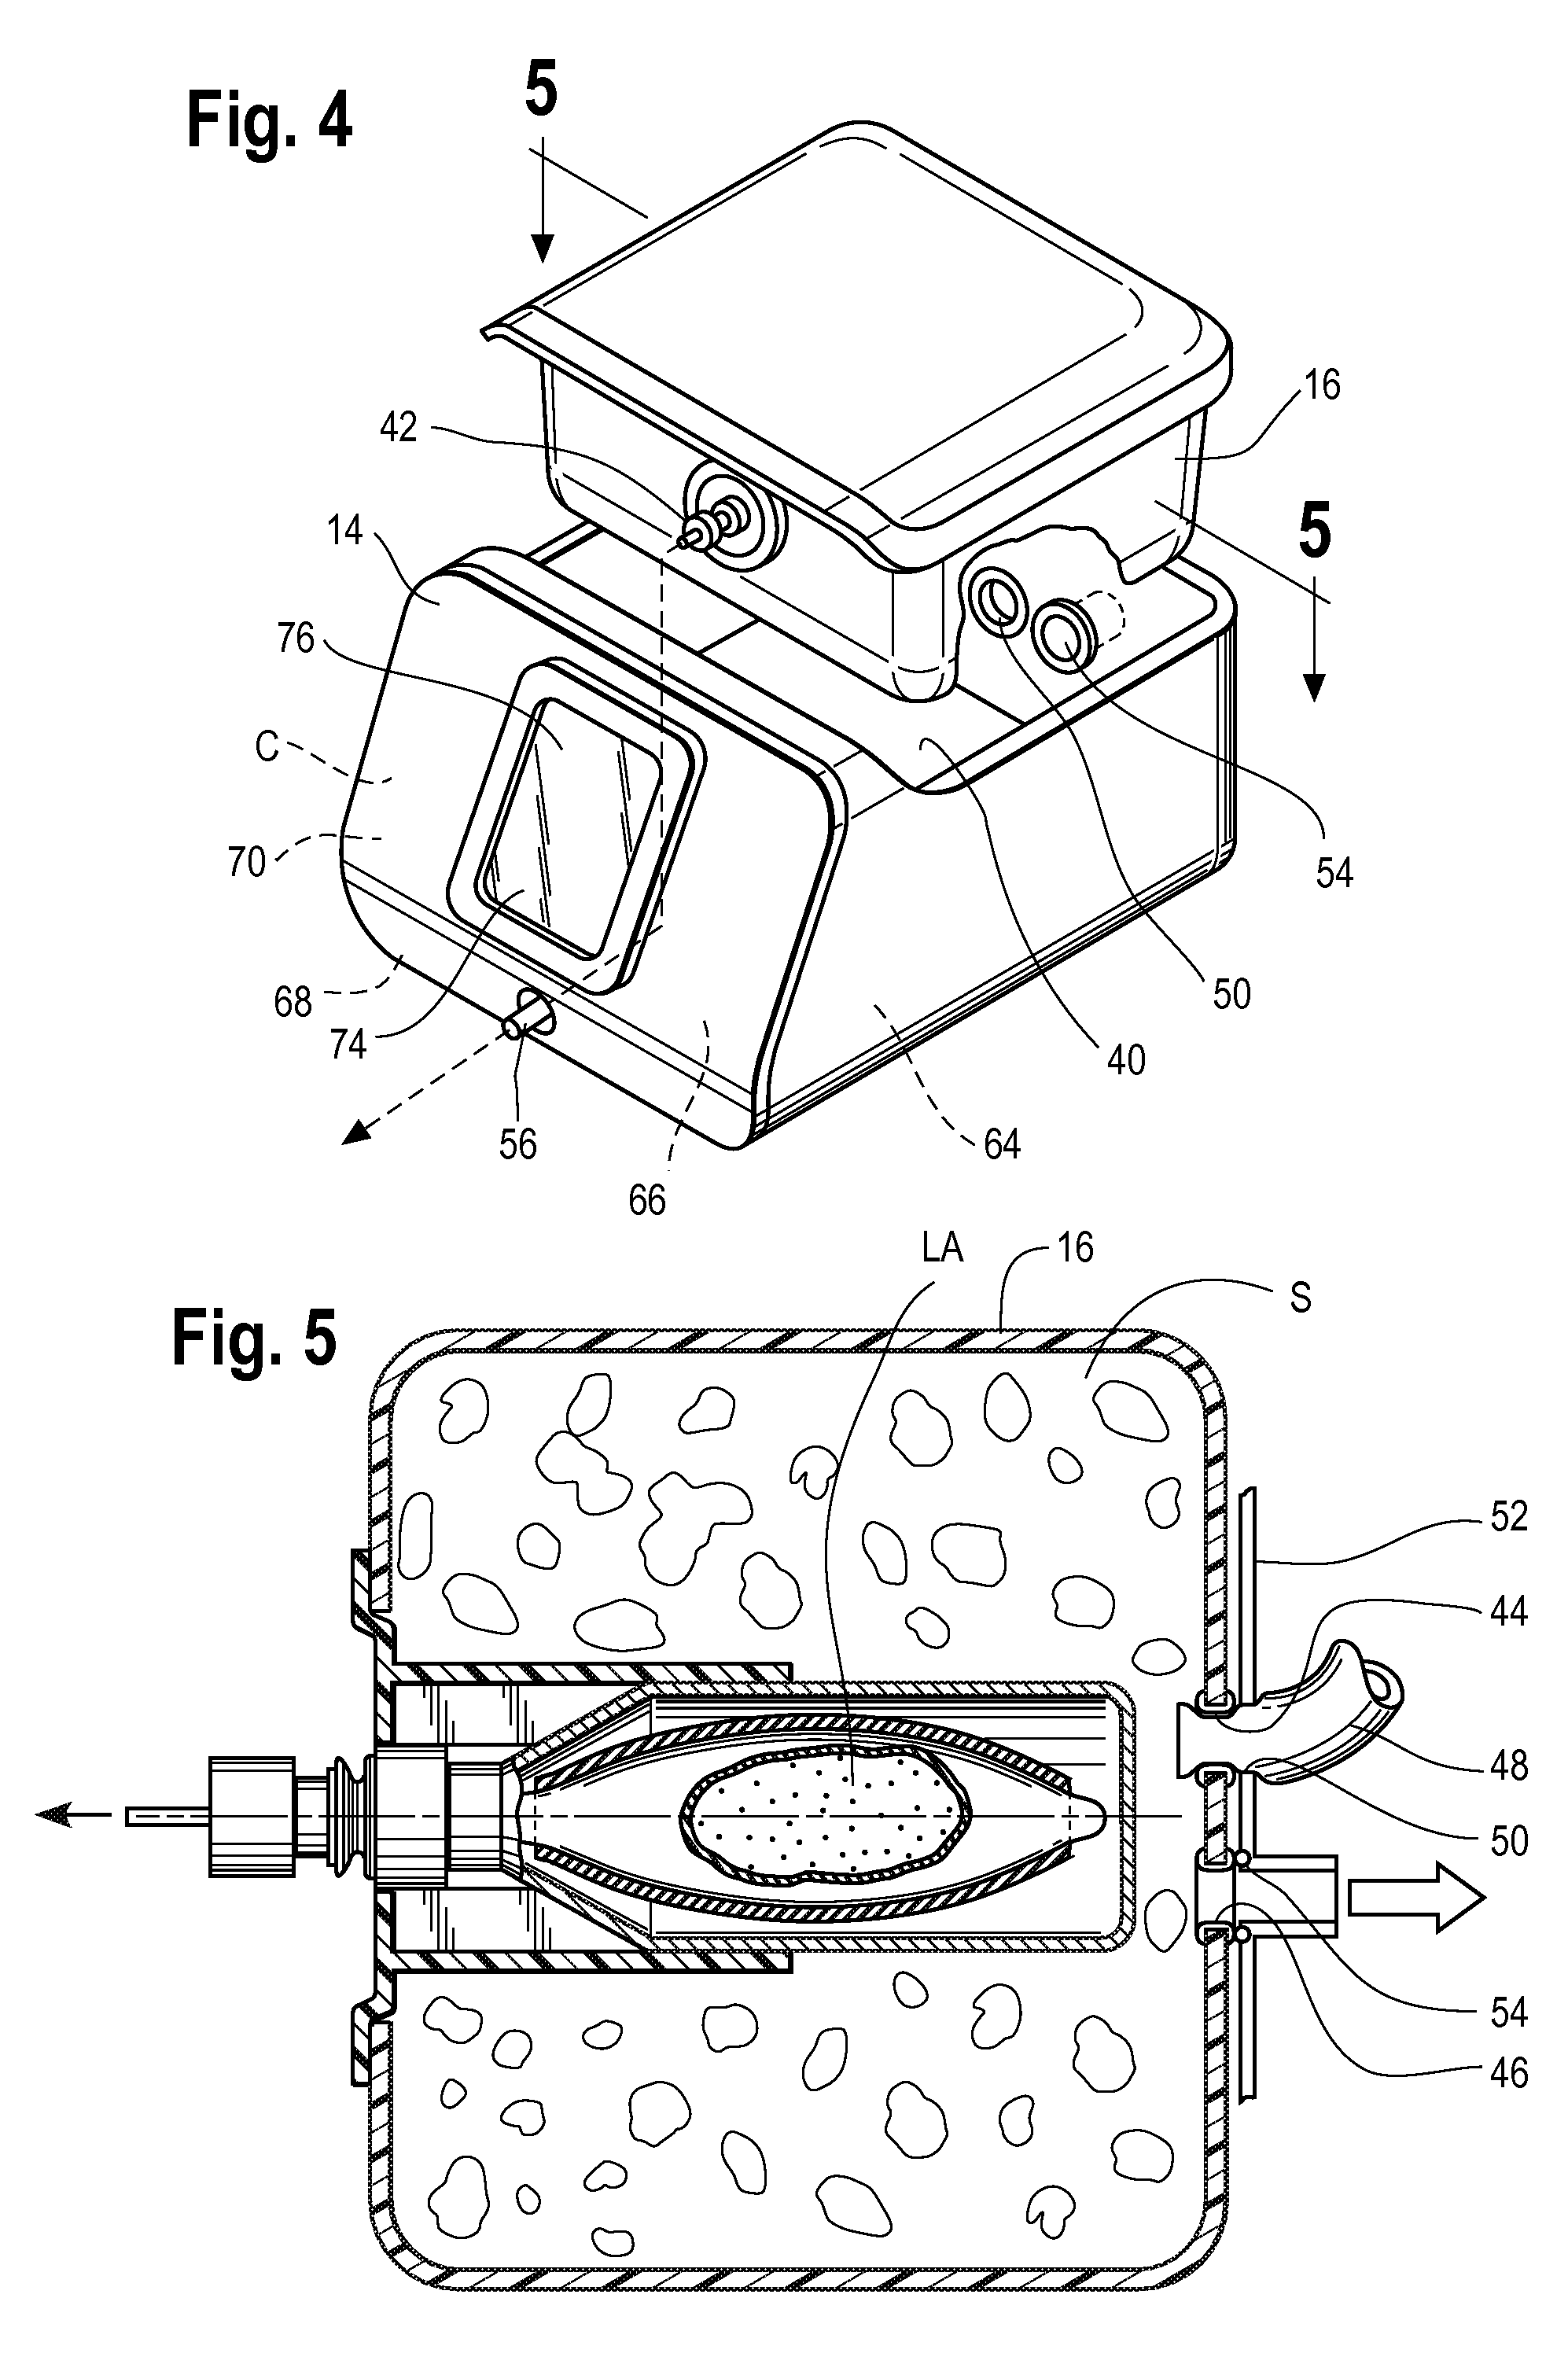 Inhaled anesthetic agent therapy and delivery system